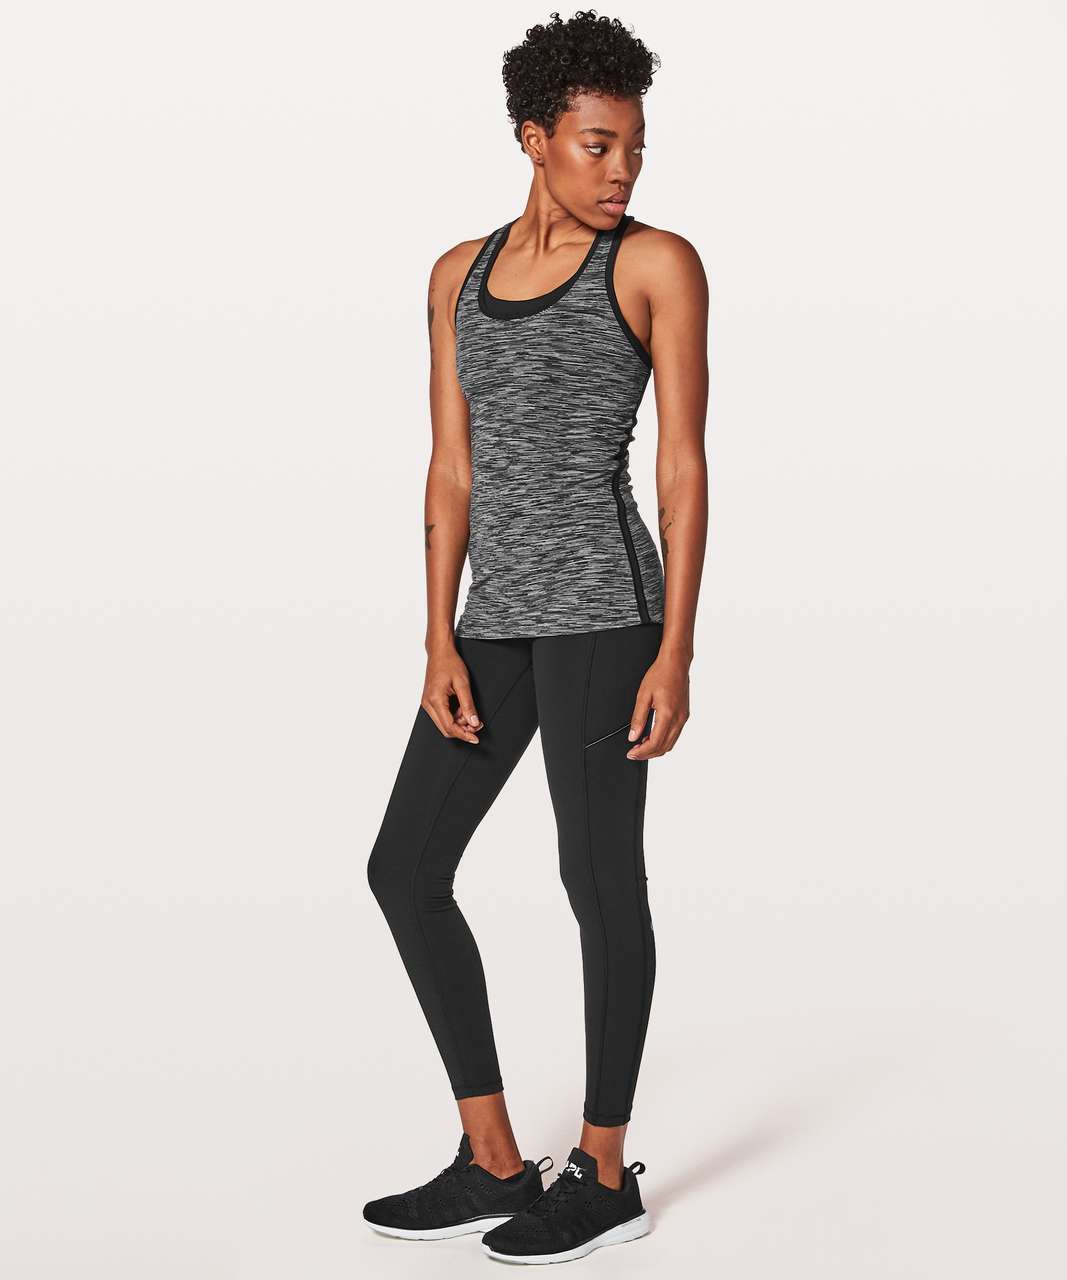 Lululemon Cool Racerback II Lined Up - Wee Are From Space Black Slate / Black